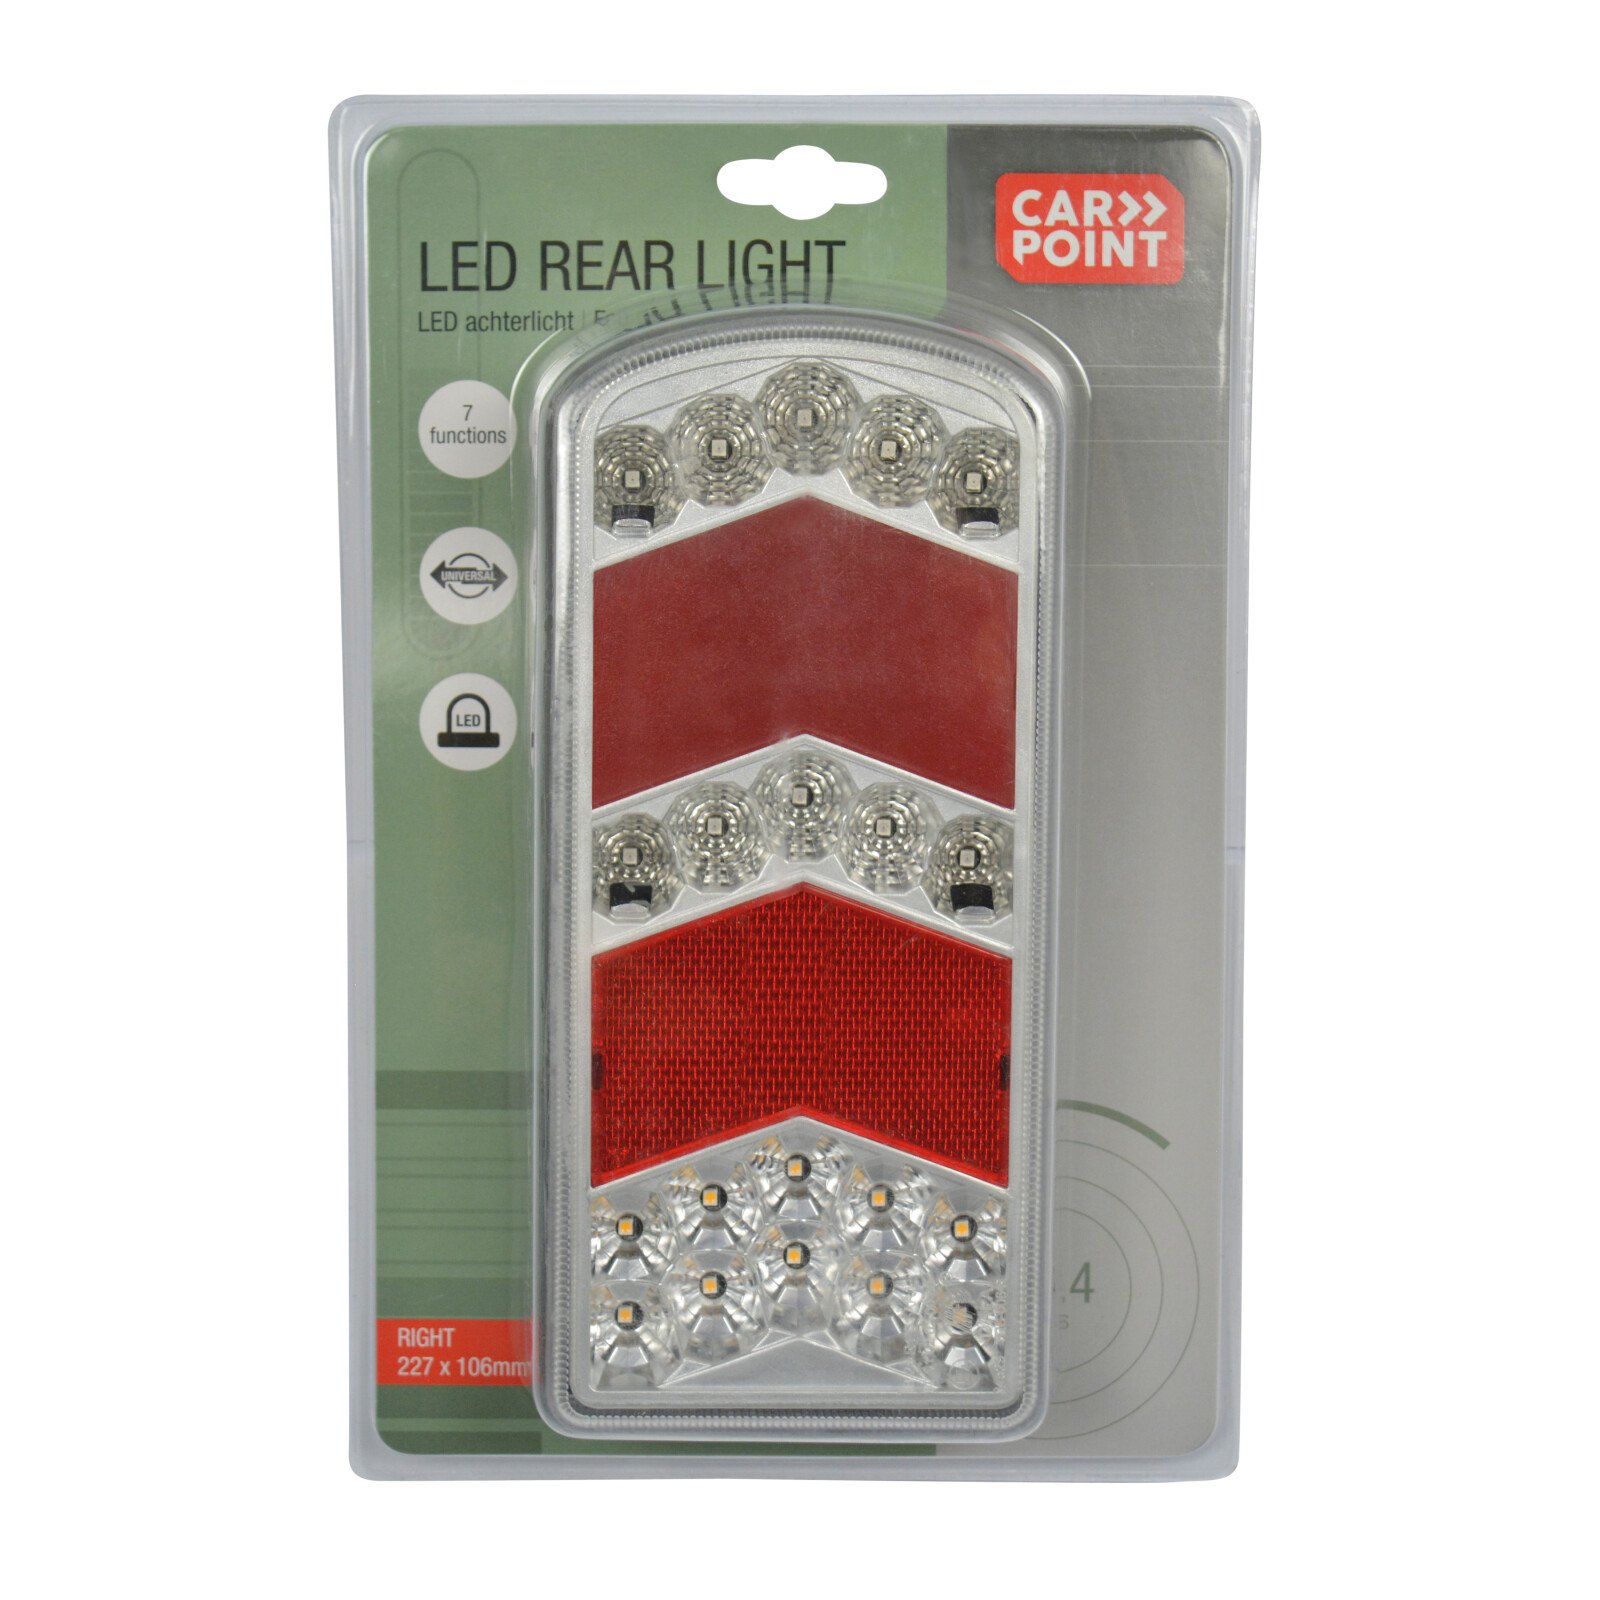 LED rear light 7funtions 227x106mm Carpoint - Right thumb